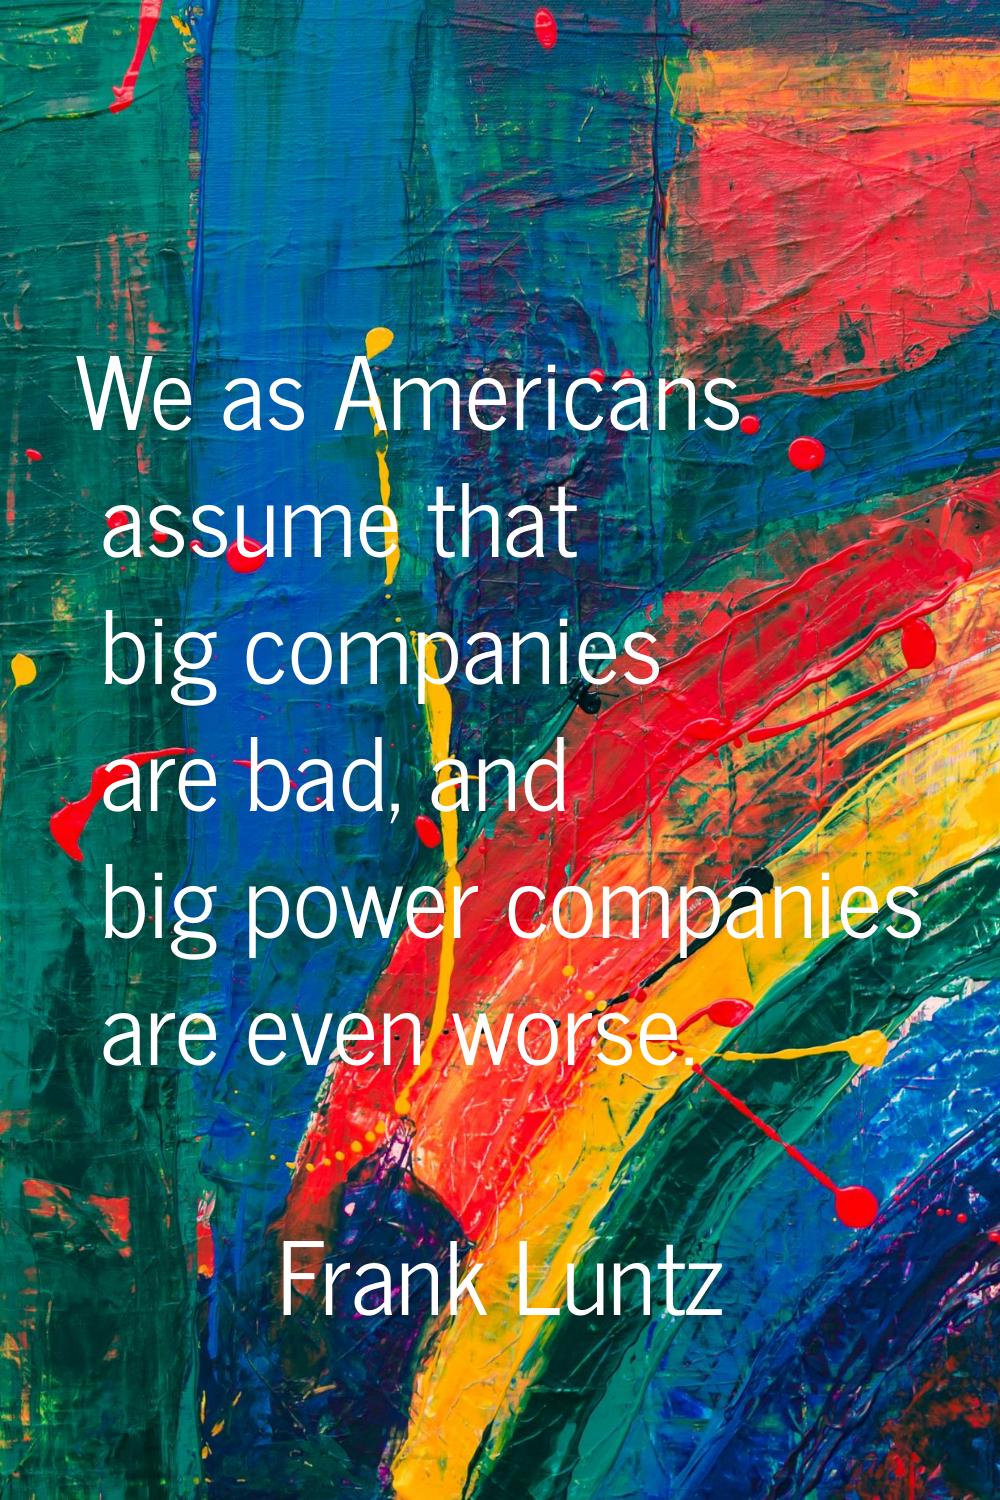 We as Americans assume that big companies are bad, and big power companies are even worse.